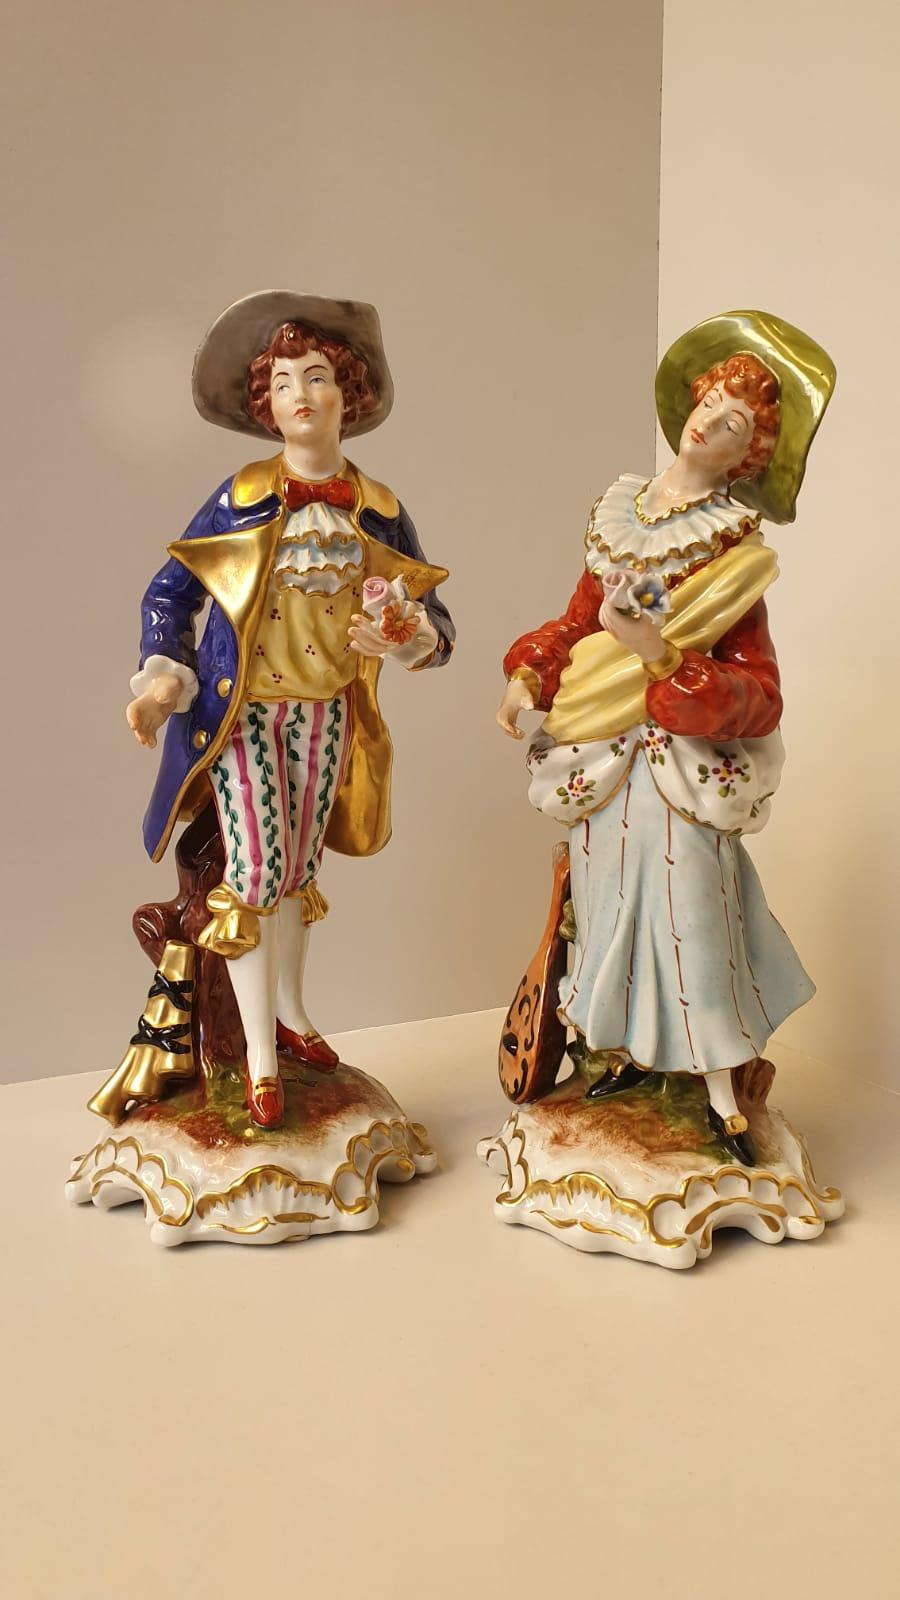 Pair of figurines in original Italian porcelain from Capo di Monte.
These Louis XVI style objects represent a romantic scene of a knight intent on giving a bouquet of flowers to a lady of the 1700, all finely made and hand painted with the ancient